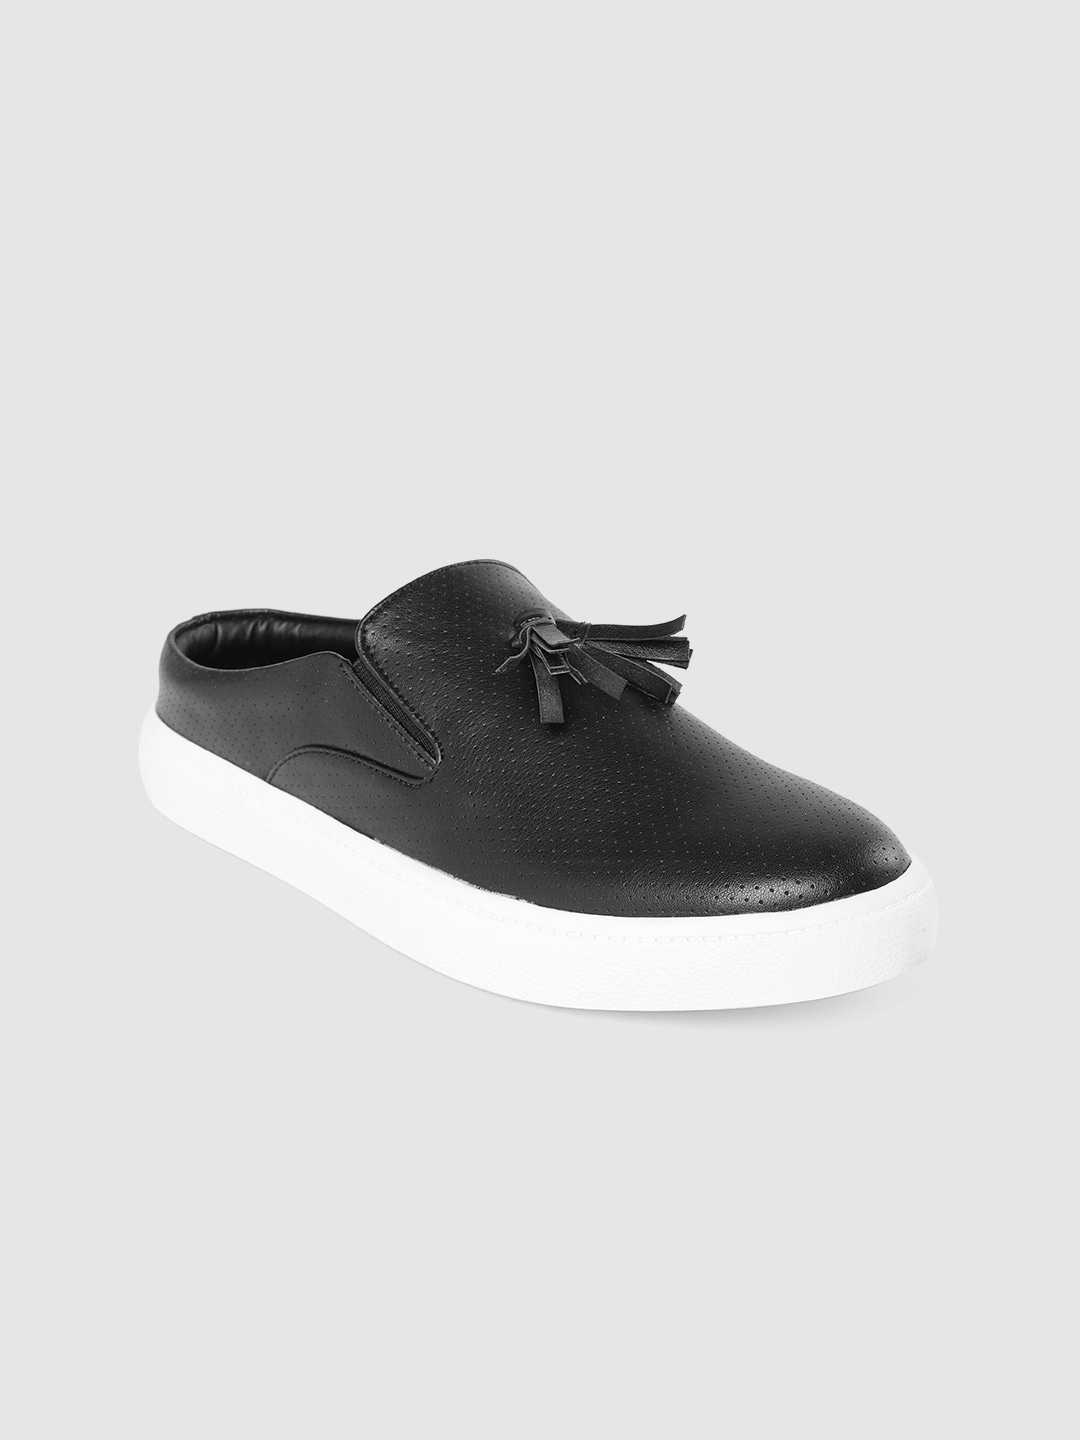 Mast & Harbour Women Black Perforated Mule Sneakers with Tasselled Detail Price in India